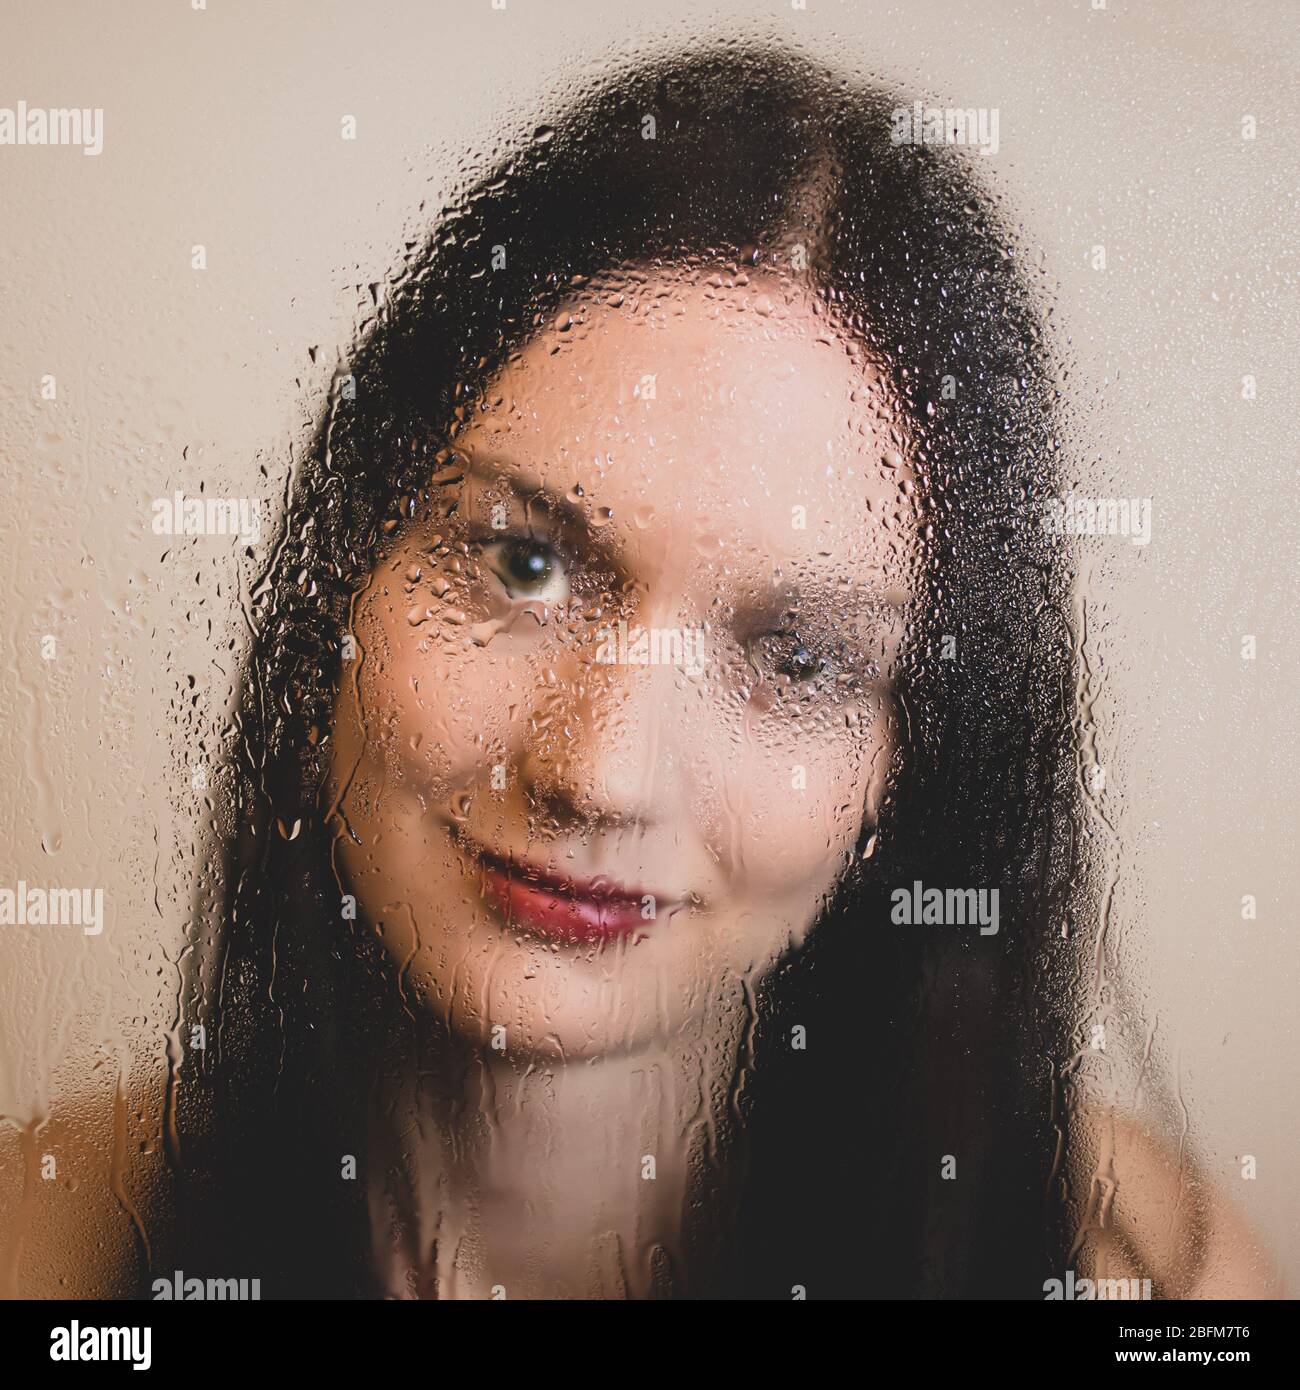 Face of happy girl with dark long hair and red lips behind a rain-covered glass window. Royalty free stock photo. Stock Photo